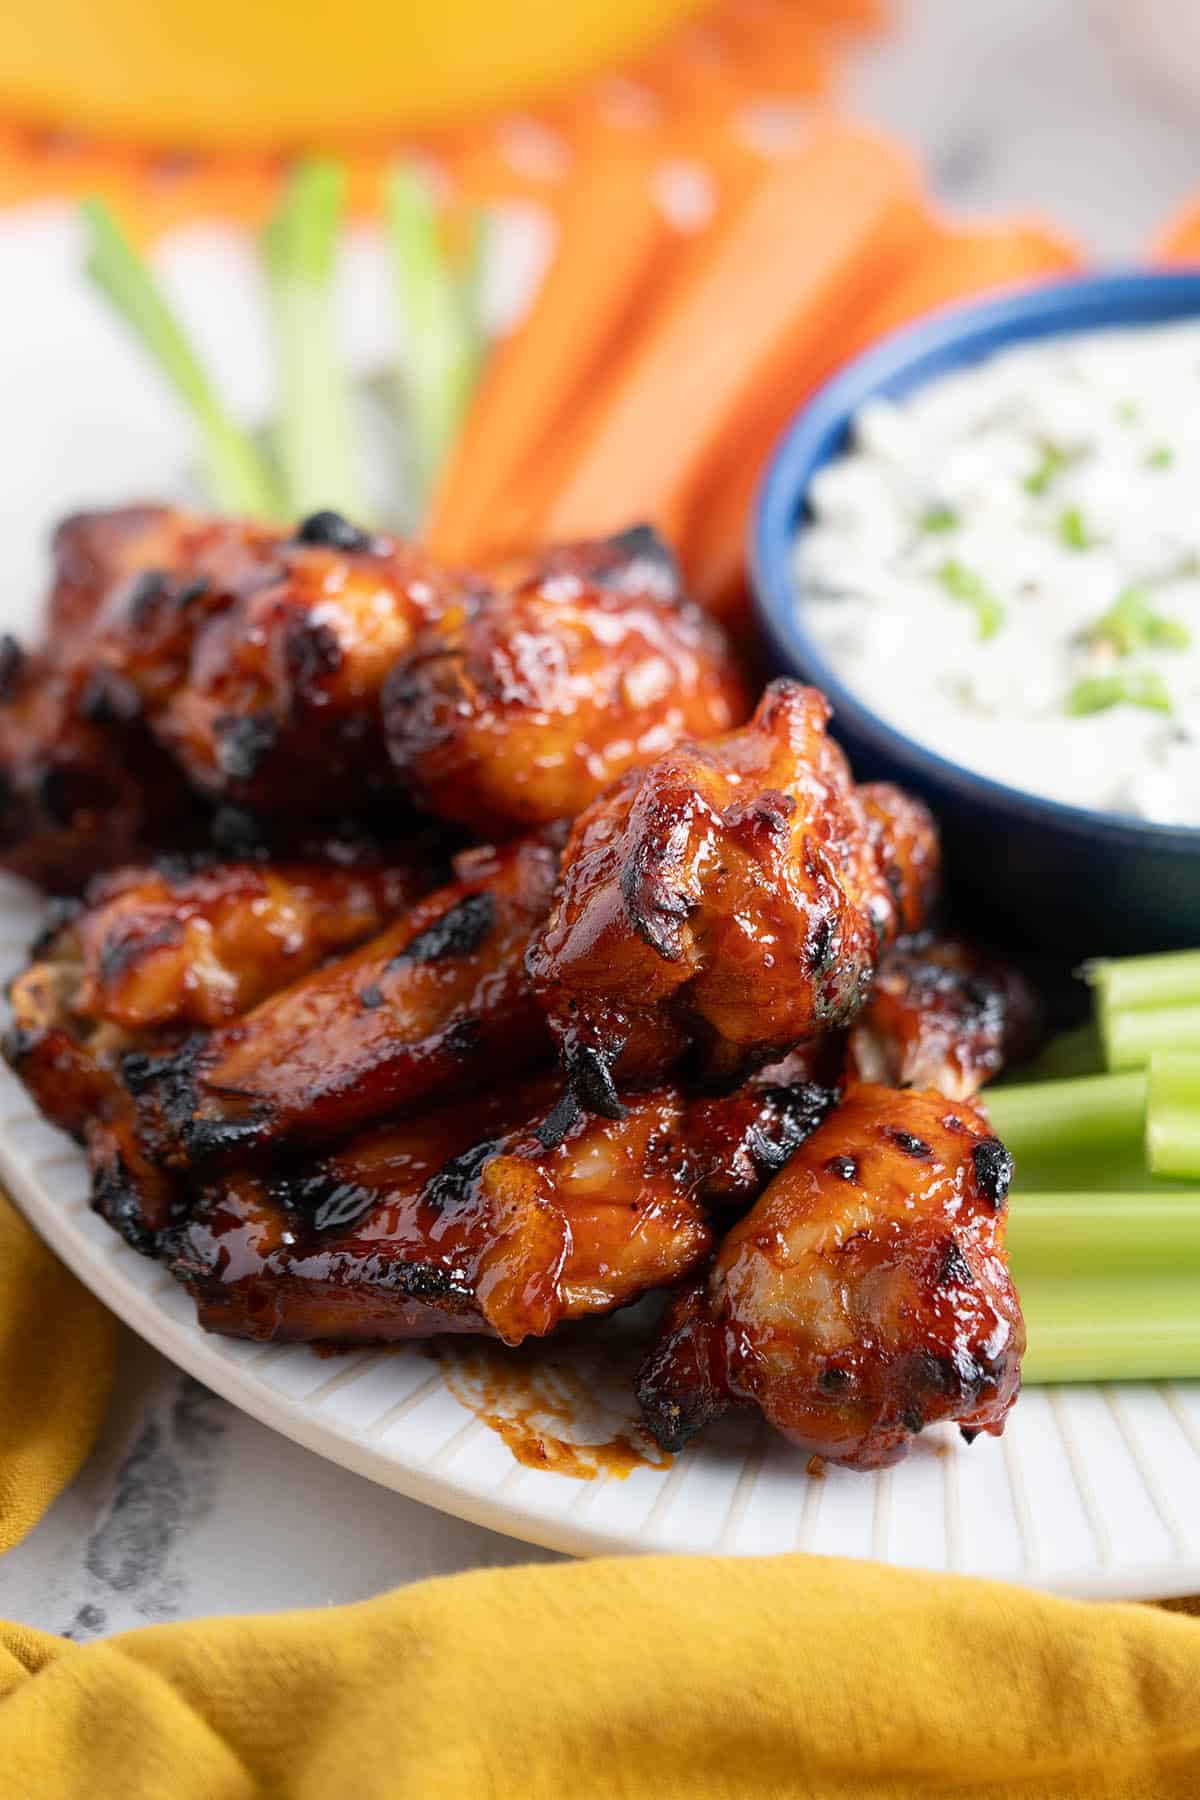 Chicken wings glazed in bbq sauce on a platter, served with carrots and celery. With a creamy dipping sauce.